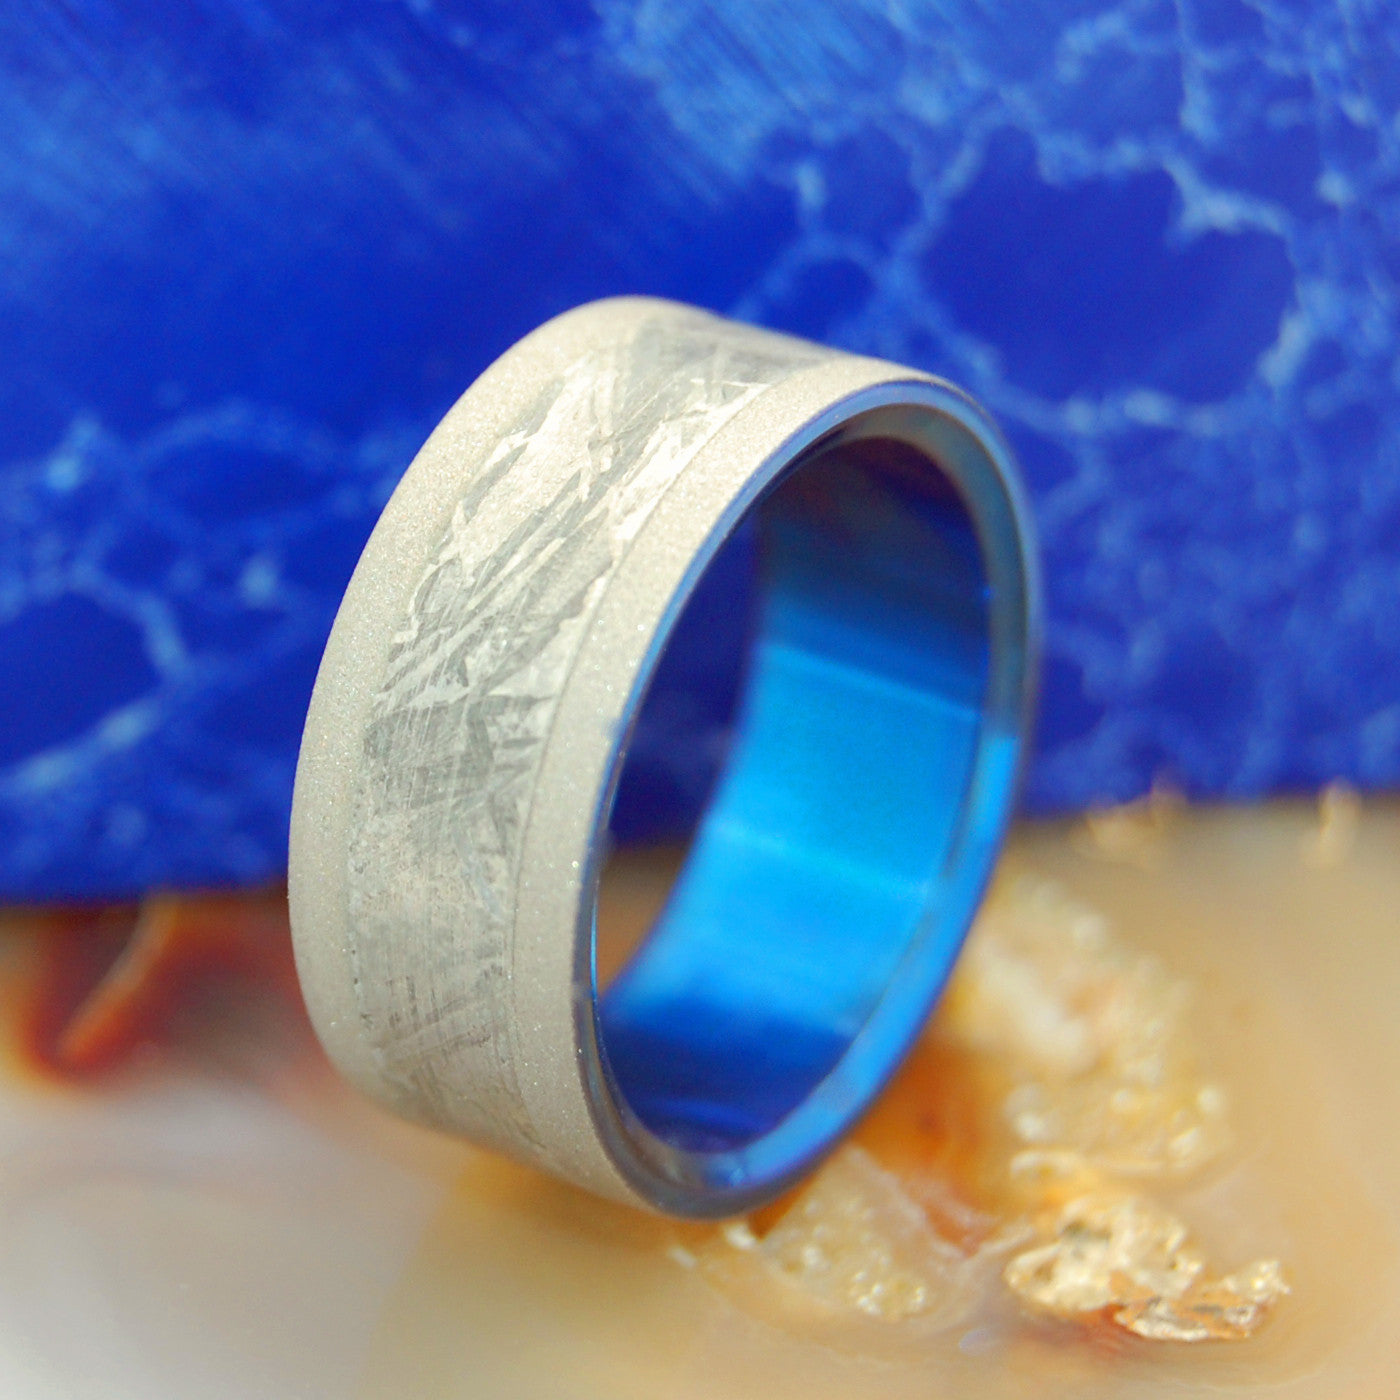 FLY ME TO THE MOON | Meteorite & Hand Anodized Titanium Wedding Rings - Minter and Richter Designs